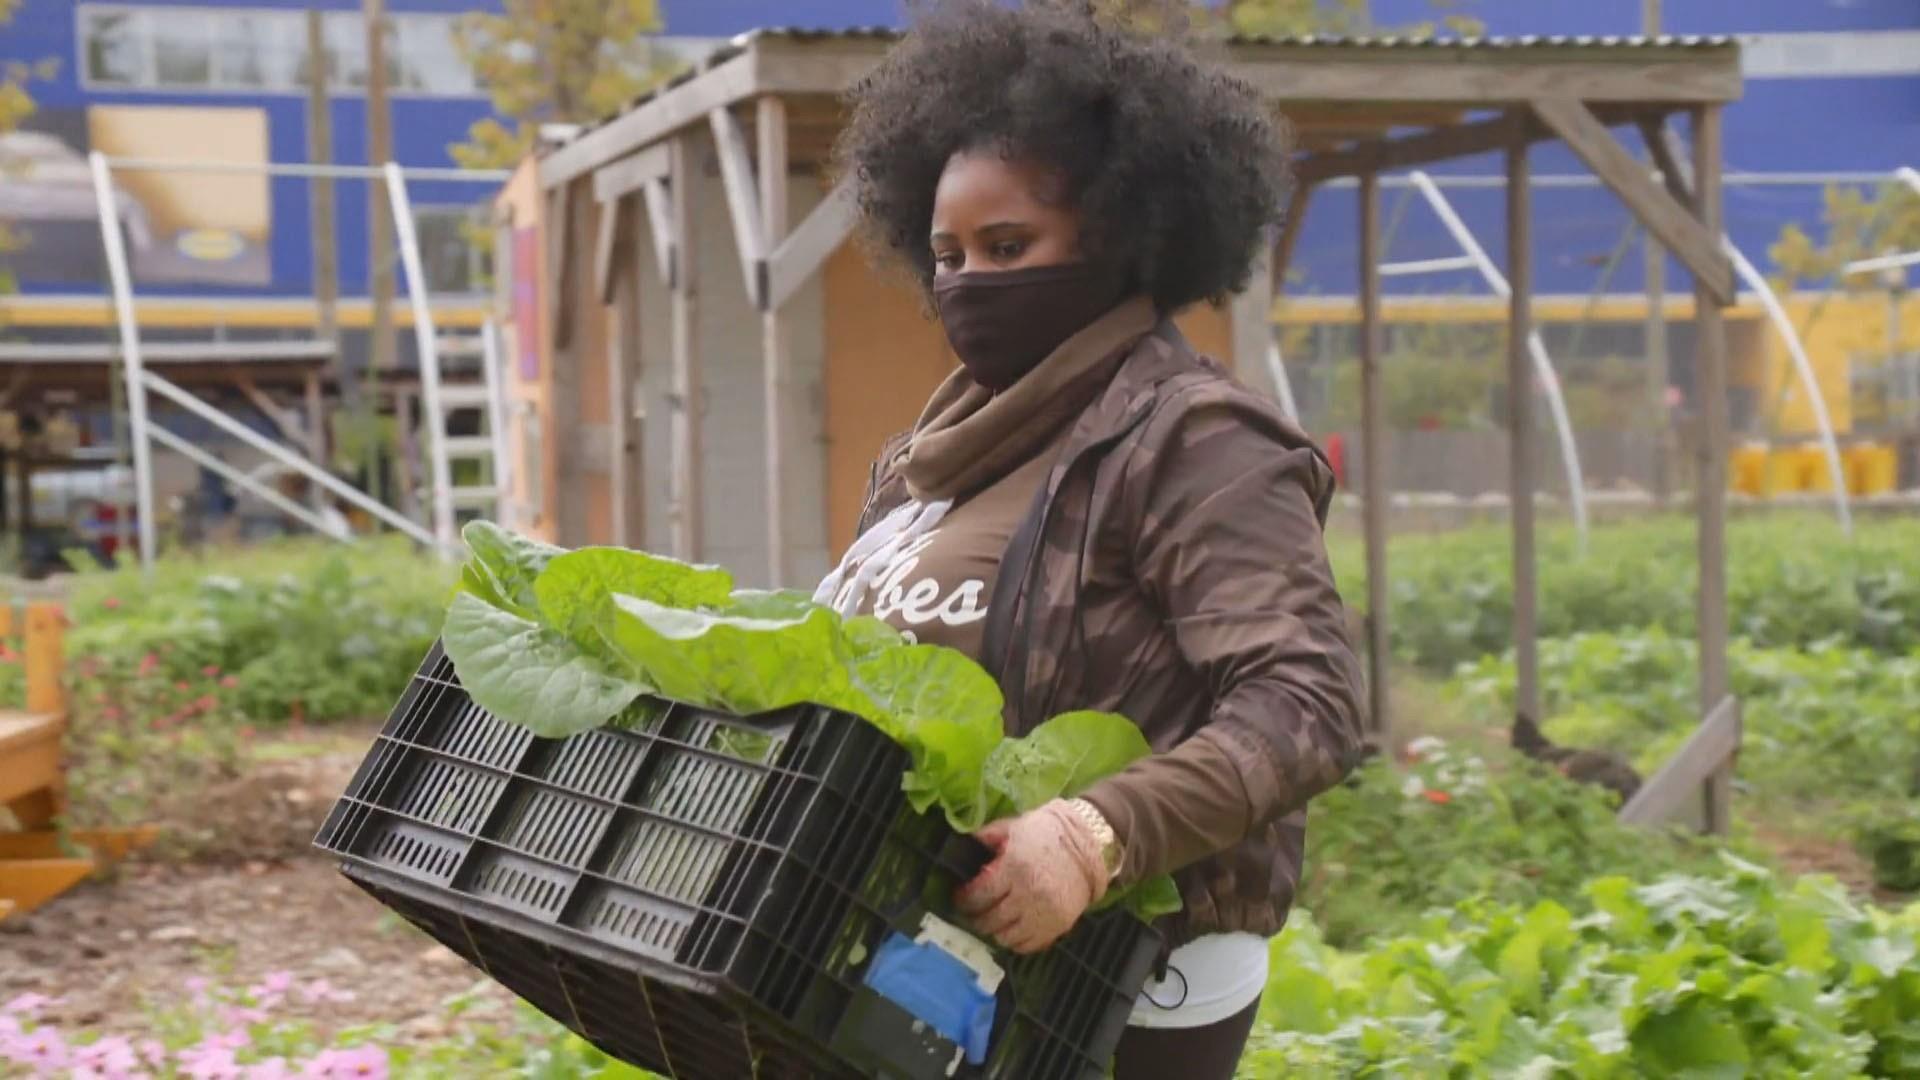 Urban farms perform to get healthier foods to their communities